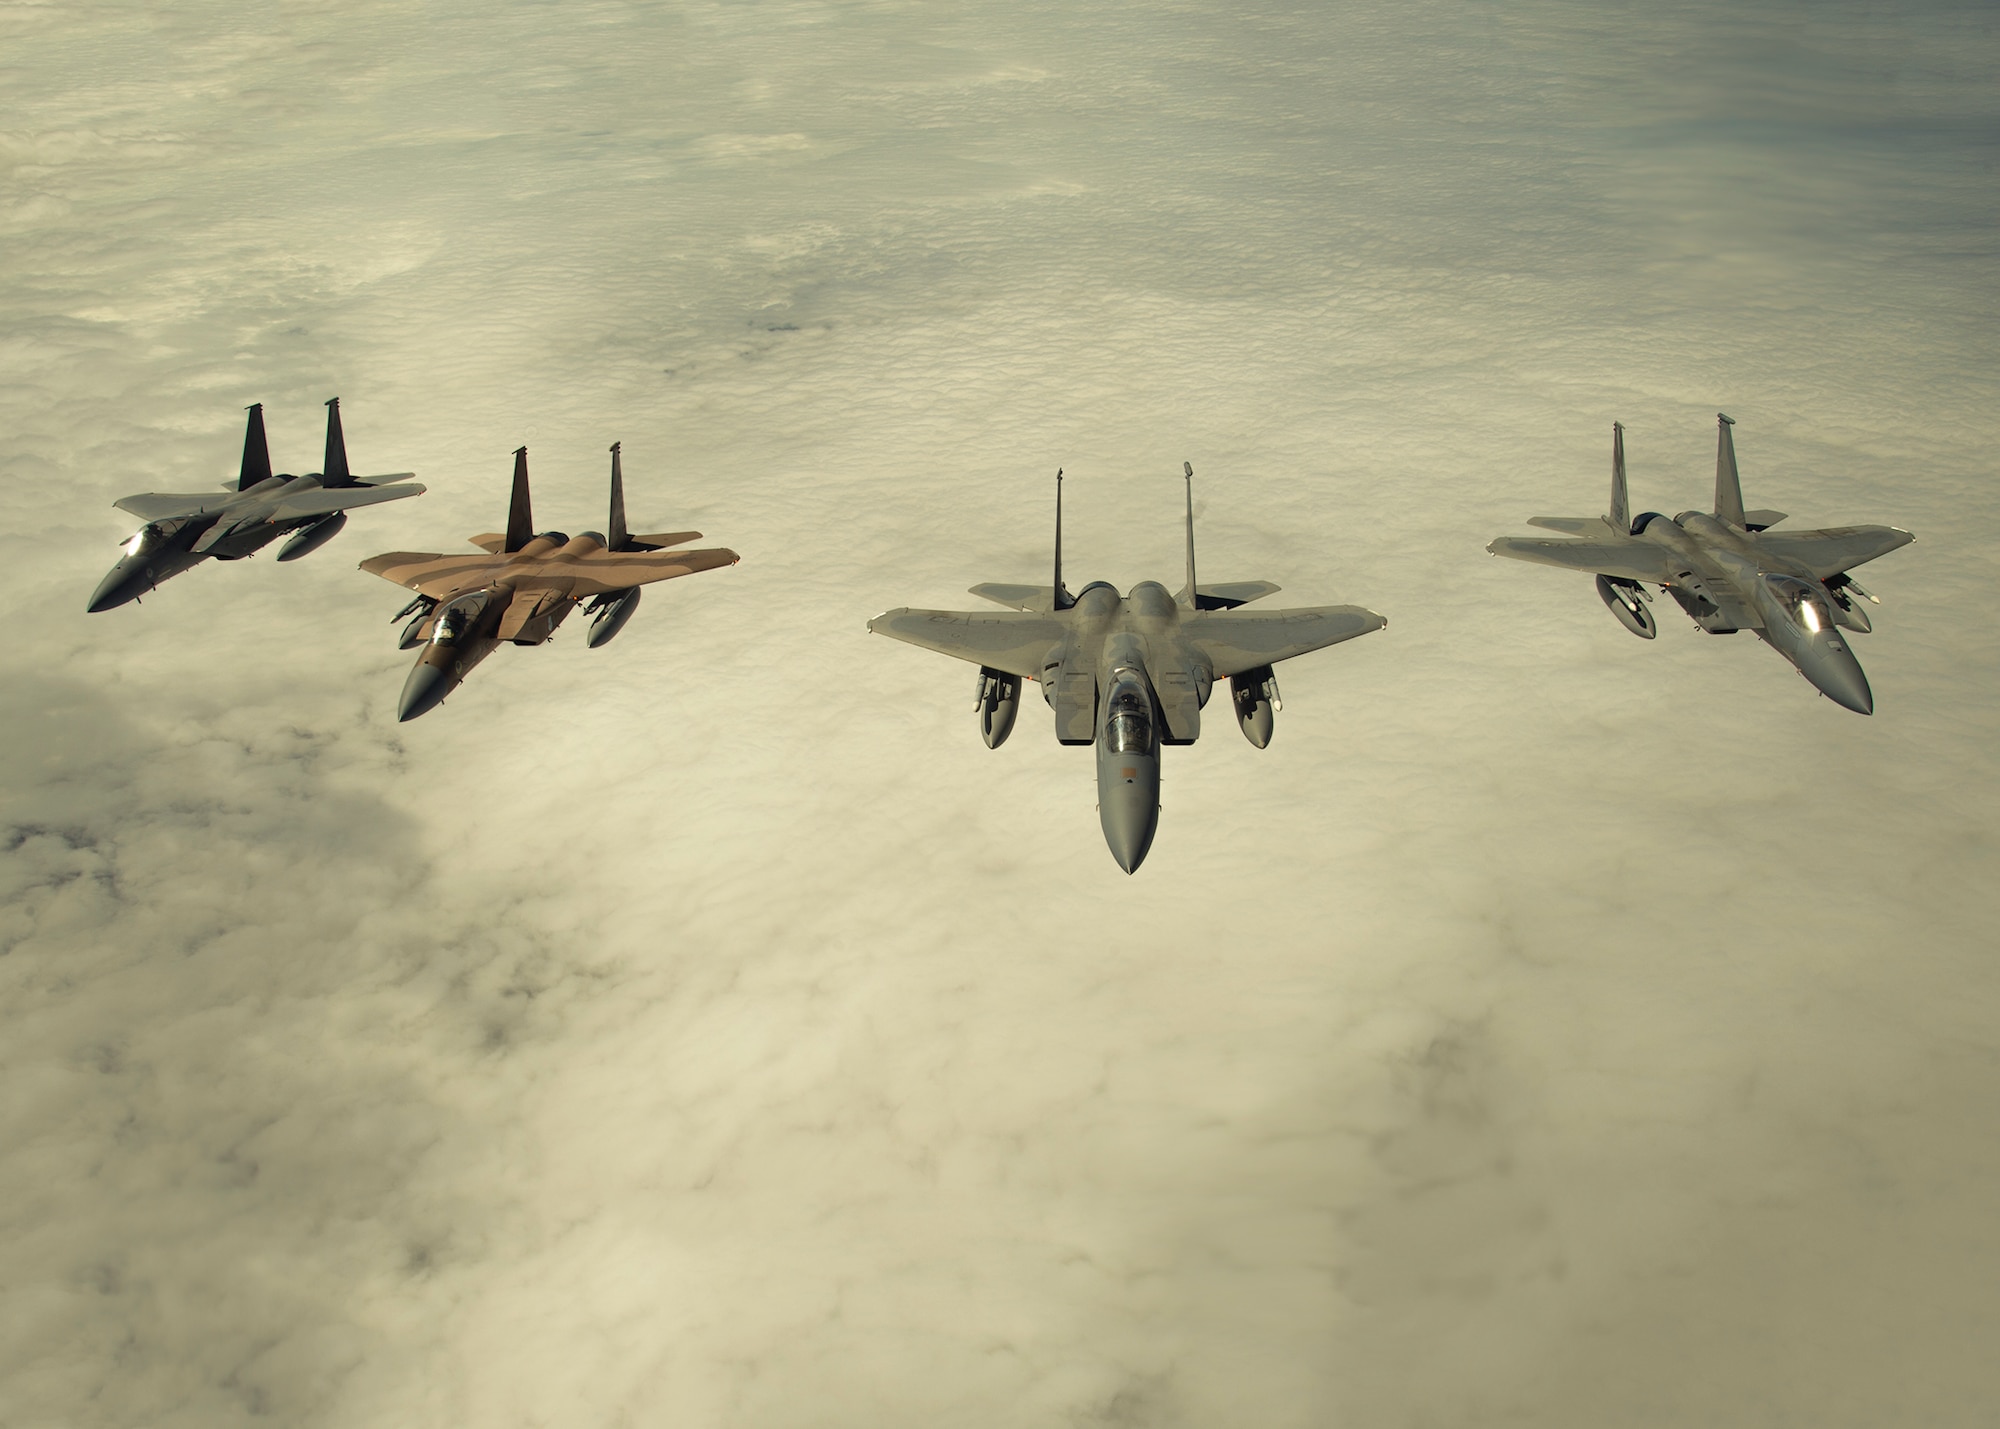 Four F-15 Eagles from the 144th Fighter Wing, Fresno, Calif., fly in formation as they make their way to participate in the Weapons System Evaluation Program (WSEP) at Tyndall Air Force Base, Fla. for the wing’s inaugural deployment with these aircraft.  WSEP provides a dissimilar aircraft training environment for pilots and crews to test their abilities during combat situations. (US Air National Guard photo by Master Sgt. David J. Loeffler)